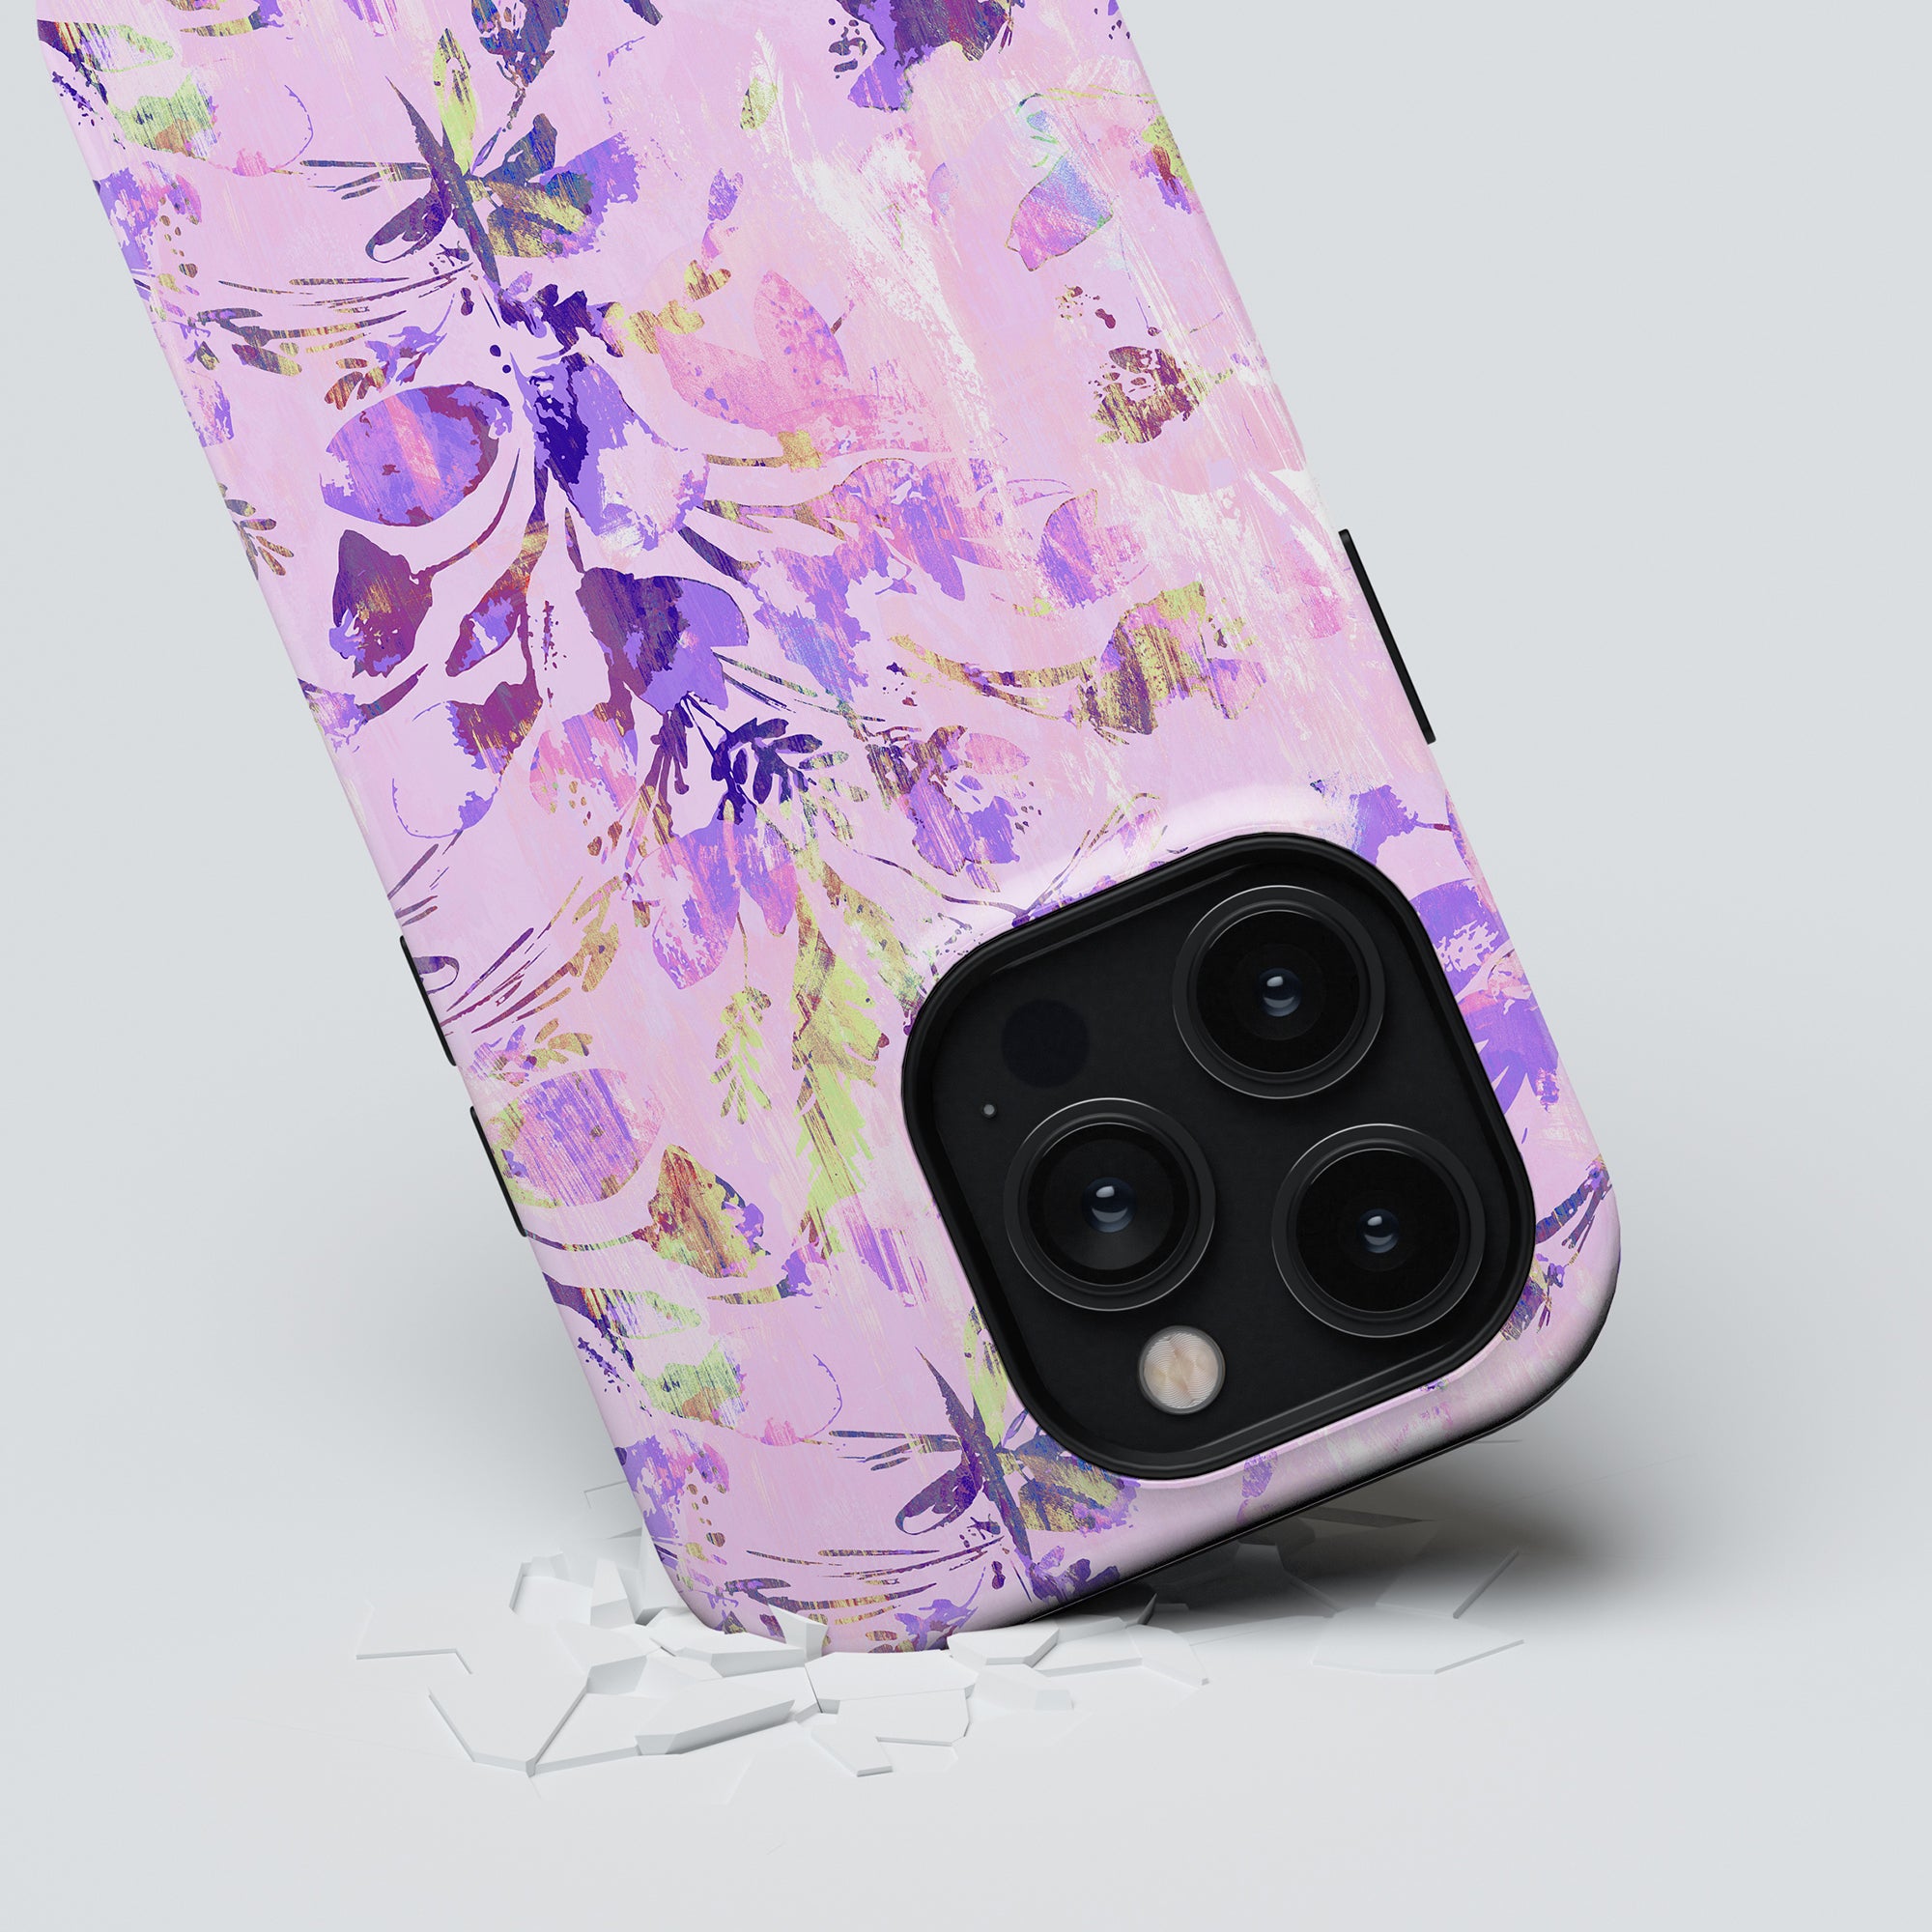 A smartphone with a Spring - Tough Case lying on its side with its camera lenses prominently displayed, against a grey background with some broken pieces beneath it.